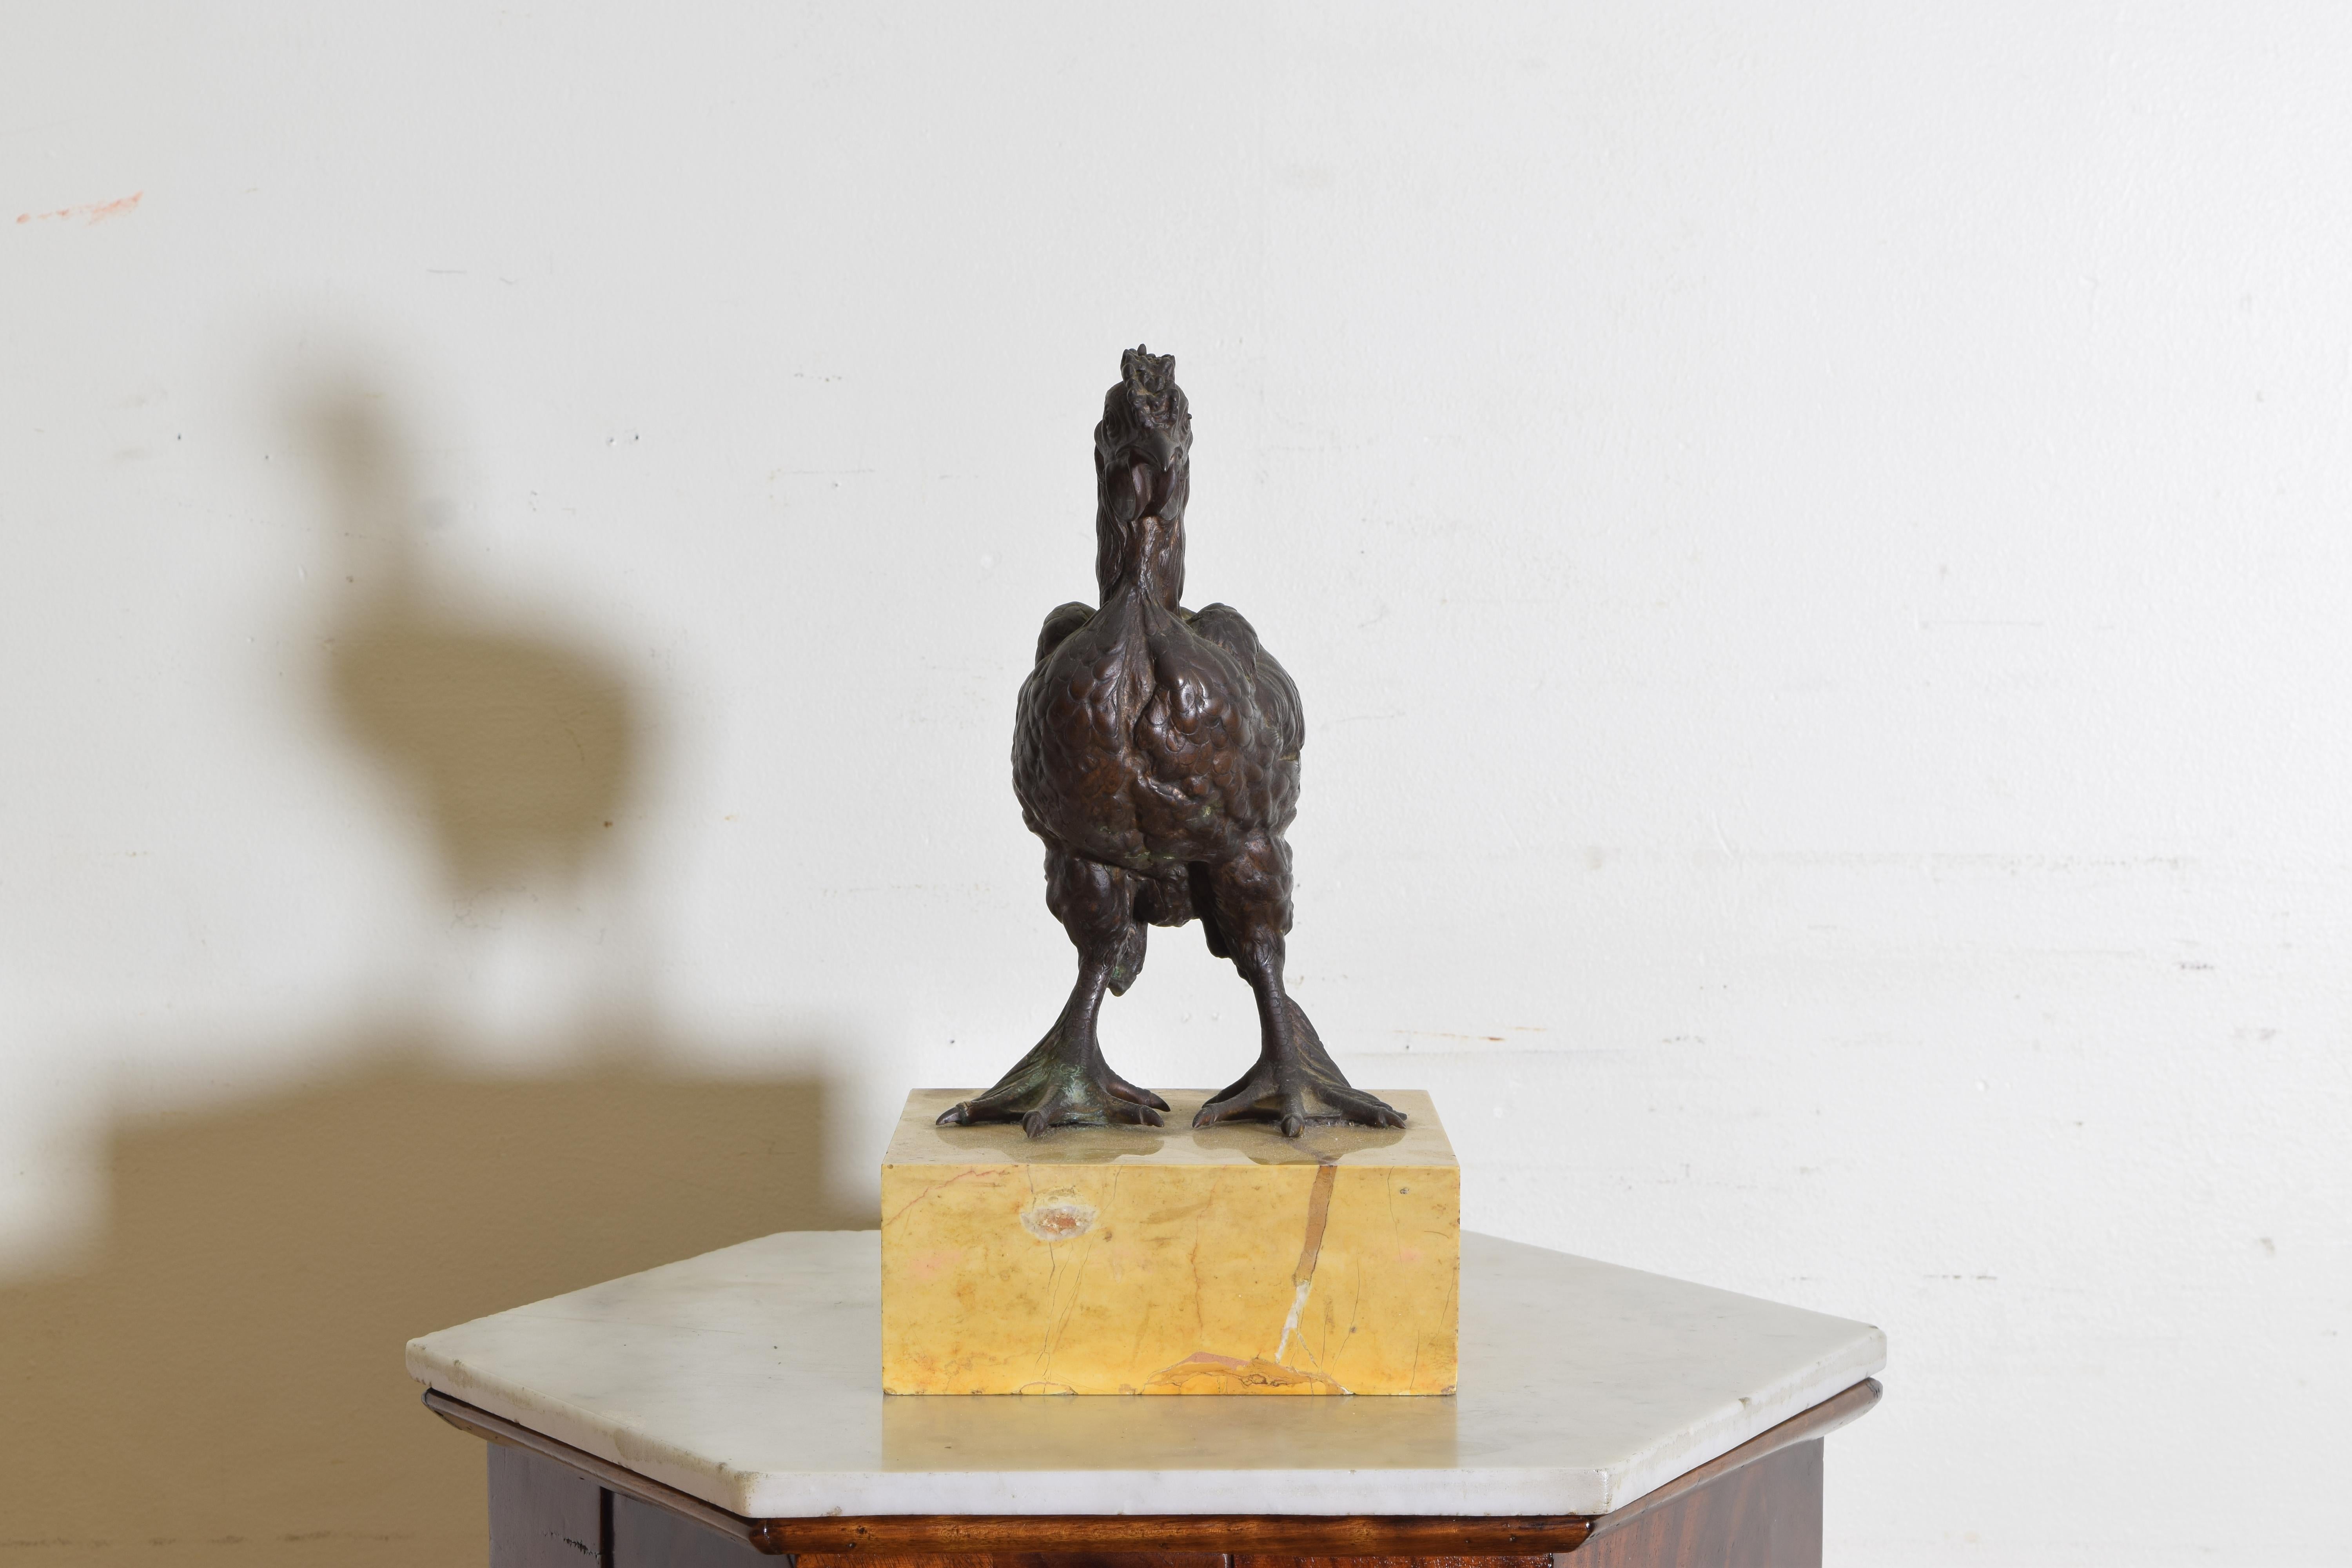 Early 20th Century Italian Bronze Sculpture of a Cockerel Mounted on a Solid Marble Base circa 1900